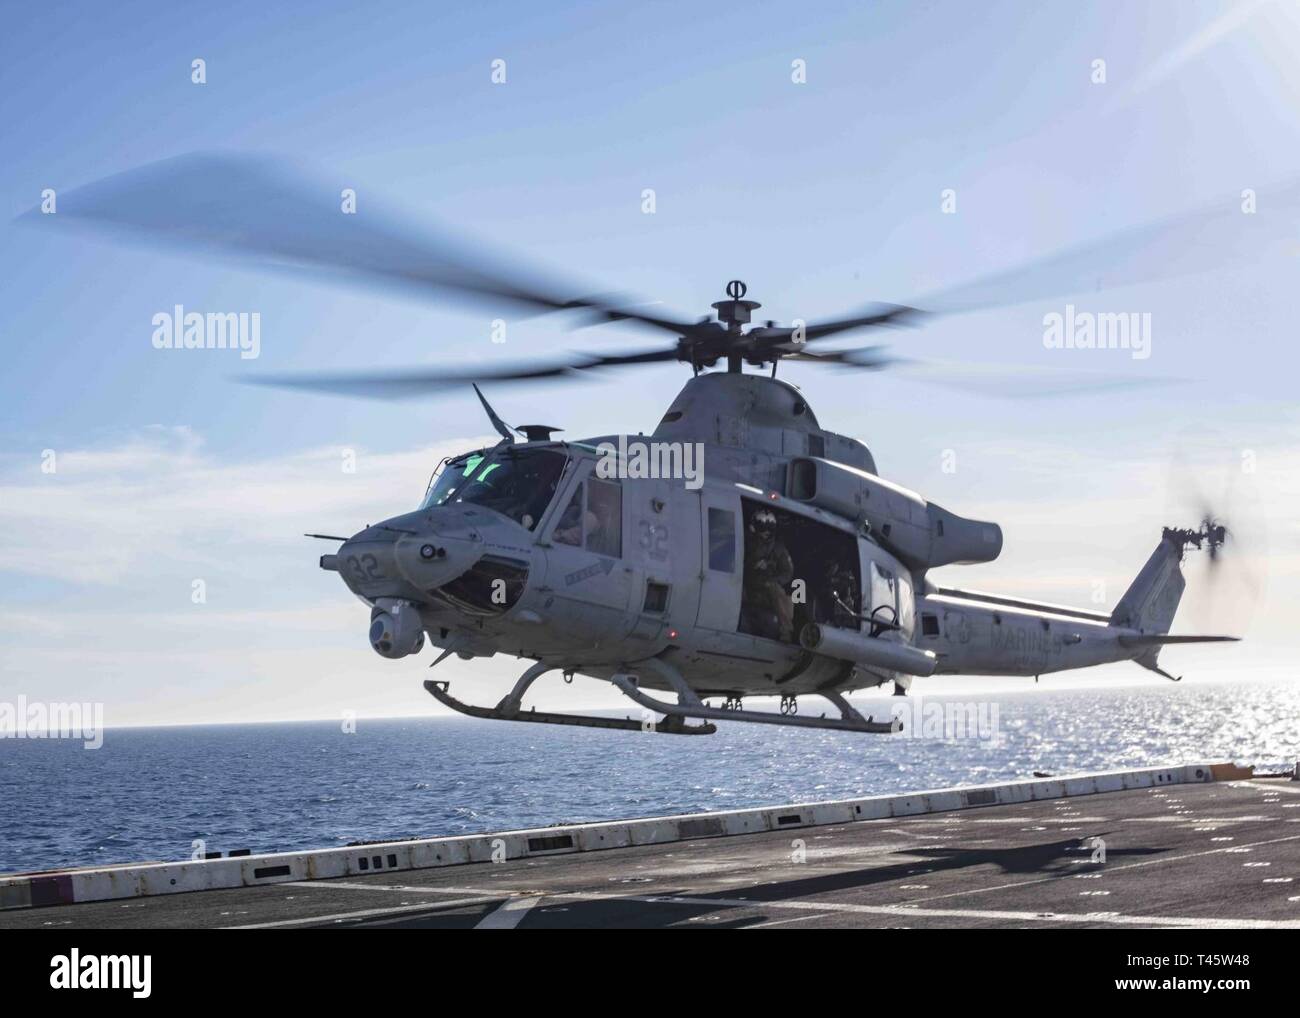 MEDITERRANEAN SEA (Mar. 8, 2019) A UH-1Y Huey helicopter assigned to the “Black Knights” of Marine Medium Tiltrotor Squadron (VMM) 264 (Reinforced) departs the flight deck of the San Antonio-class amphibious transport dock ship USS Arlington (LPD 24), Mar. 8, 2019. Arlington is on a scheduled deployment as part of the Kearsarge Amphibious Ready Group in support of maritime security operations, crisis response and theater security cooperation, while also providing a forward naval presence. Stock Photo